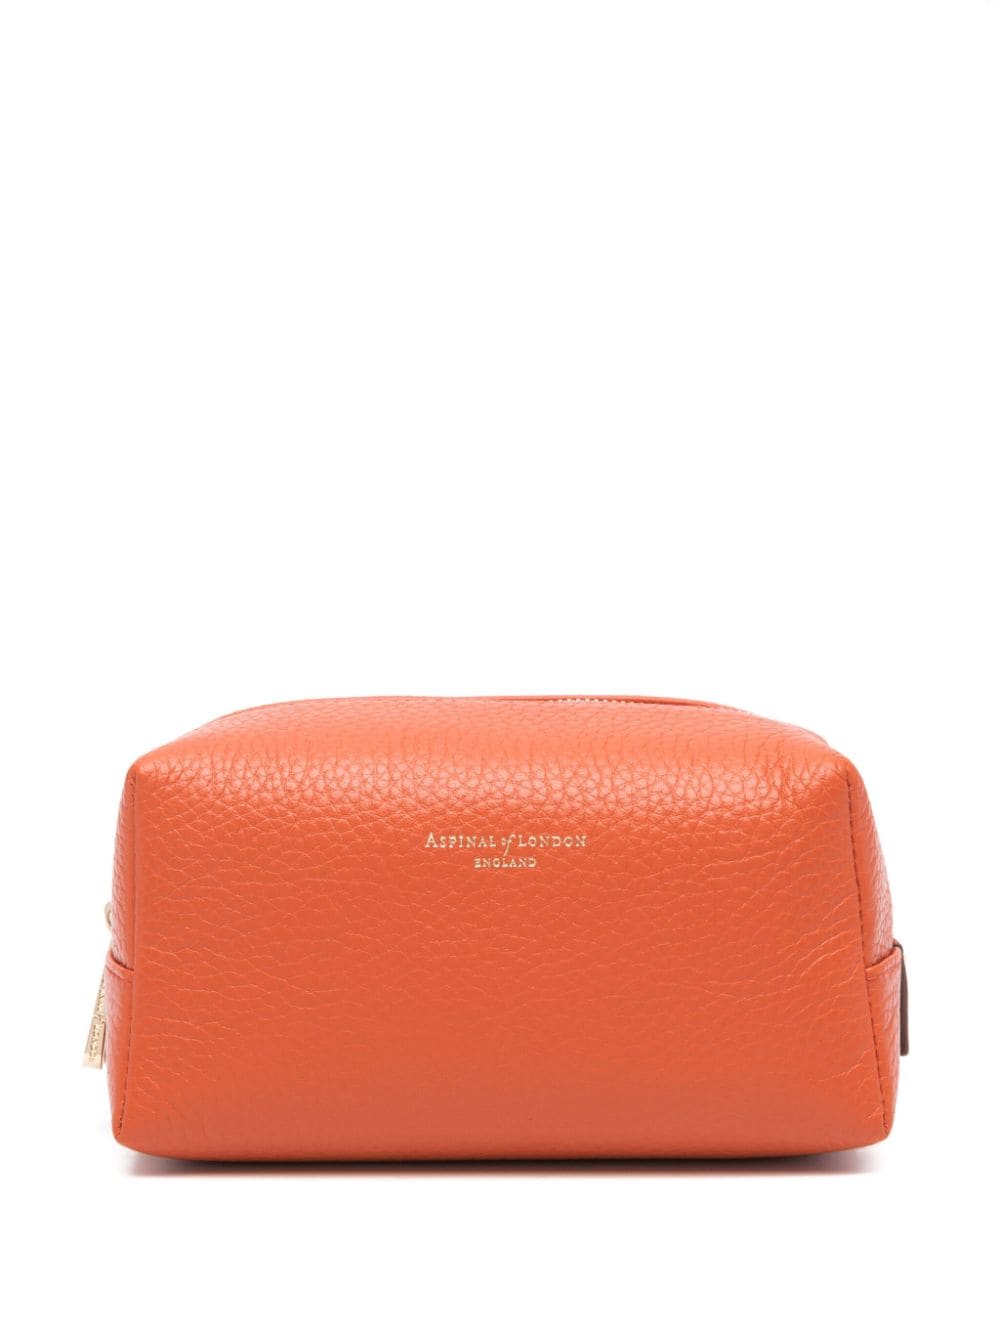 Aspinal Of London small London leather make up bag - Orange von Aspinal Of London